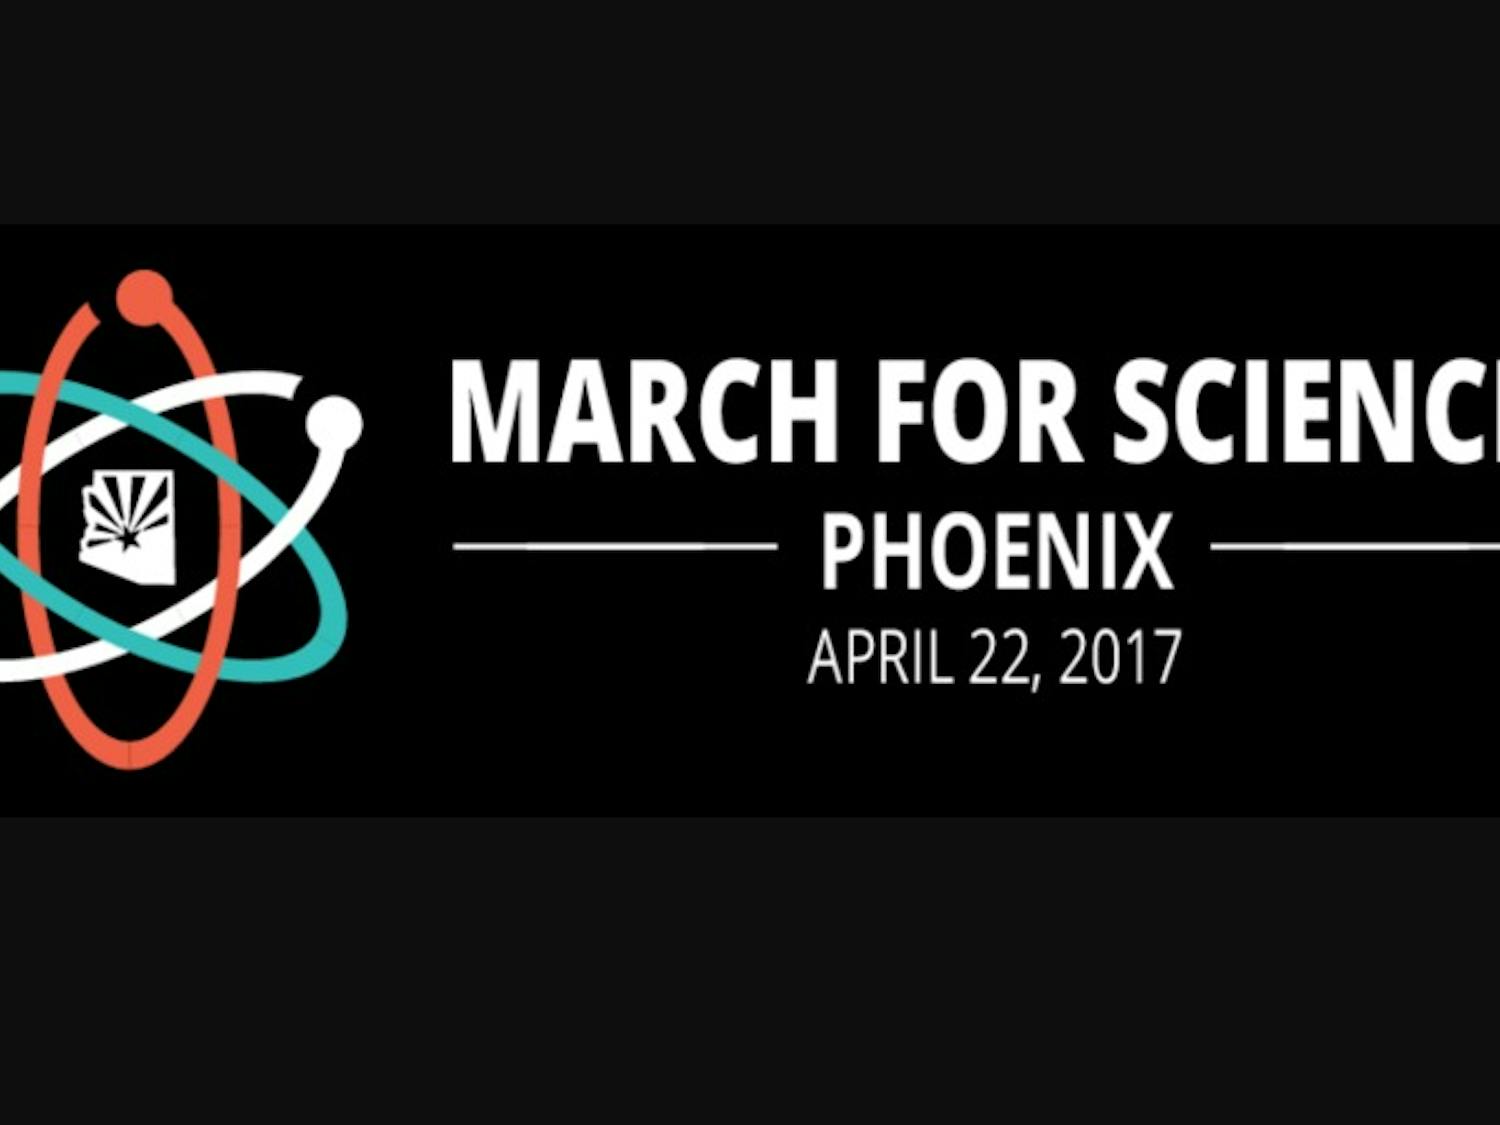 The March for Science will take place in Phoenix, Arizona on April 22, 2017.